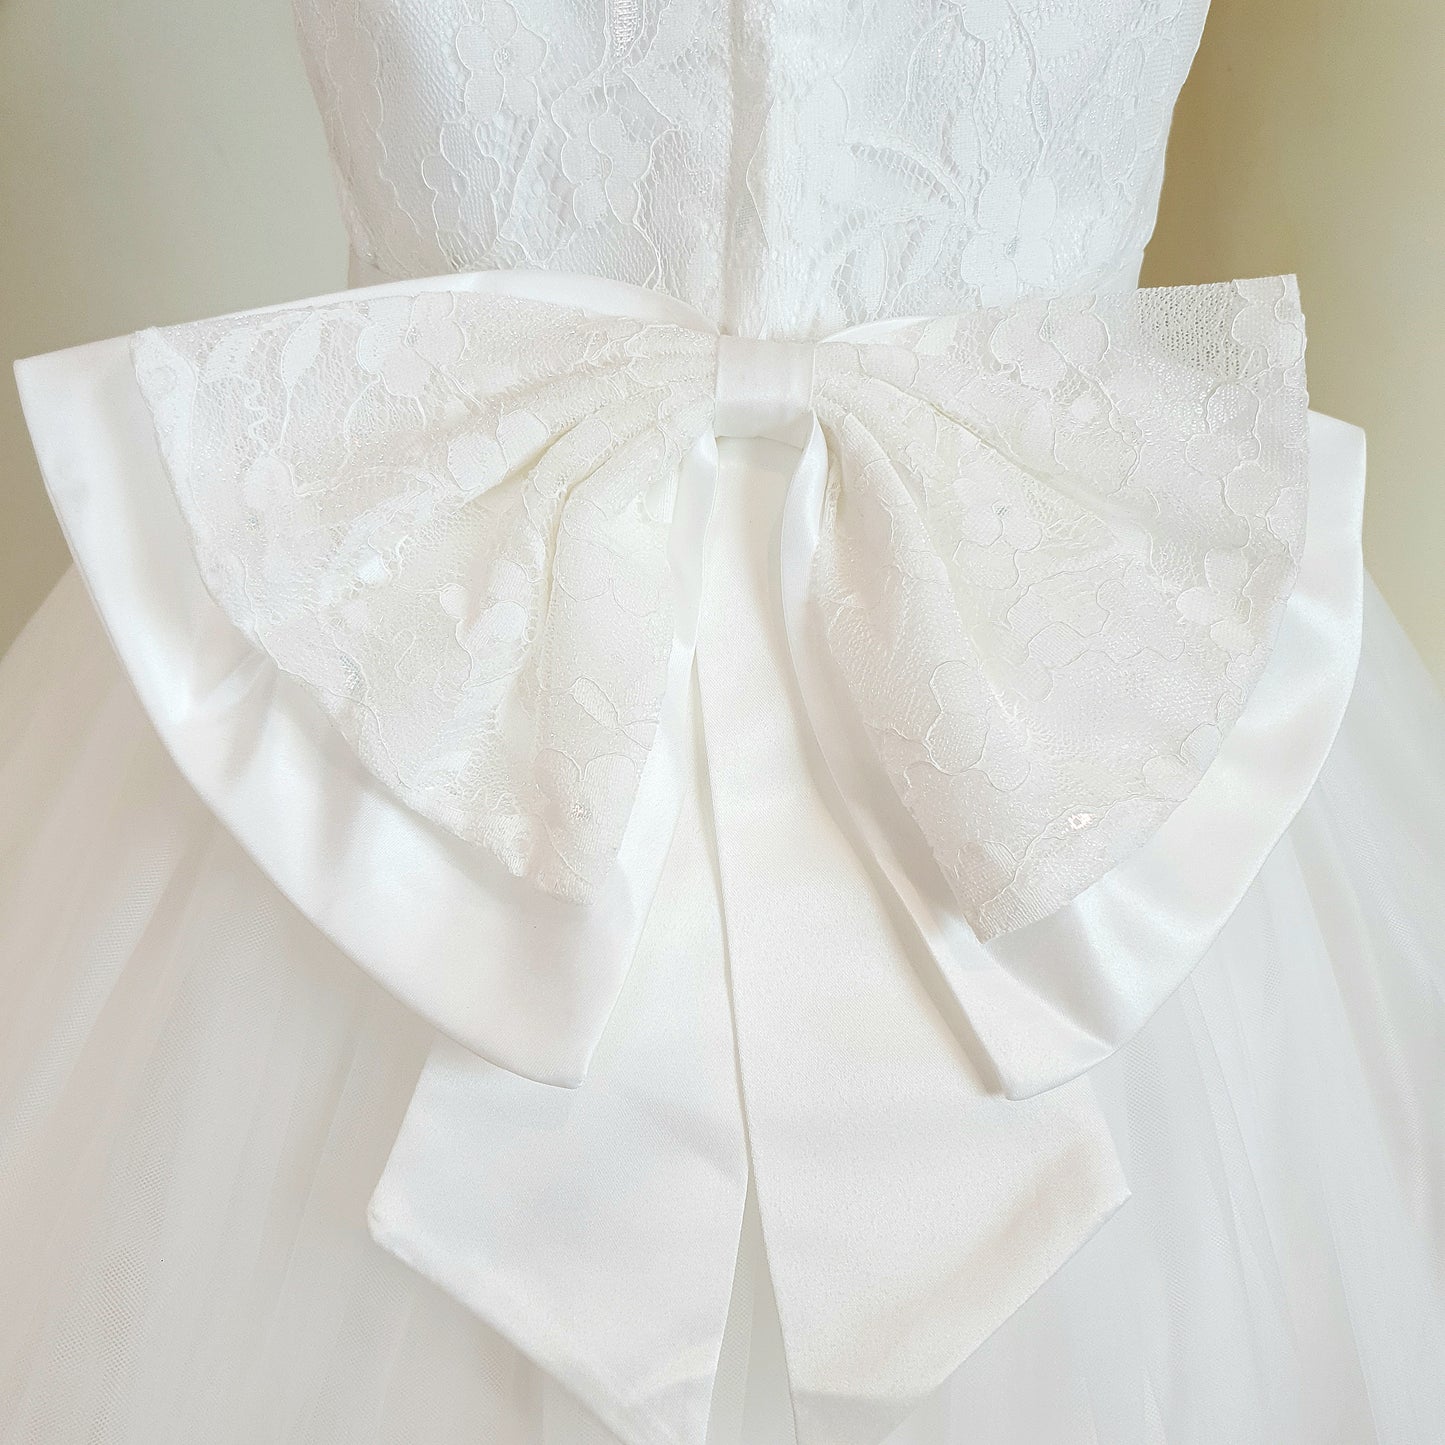 Floral lace and appliques with big bow white dress